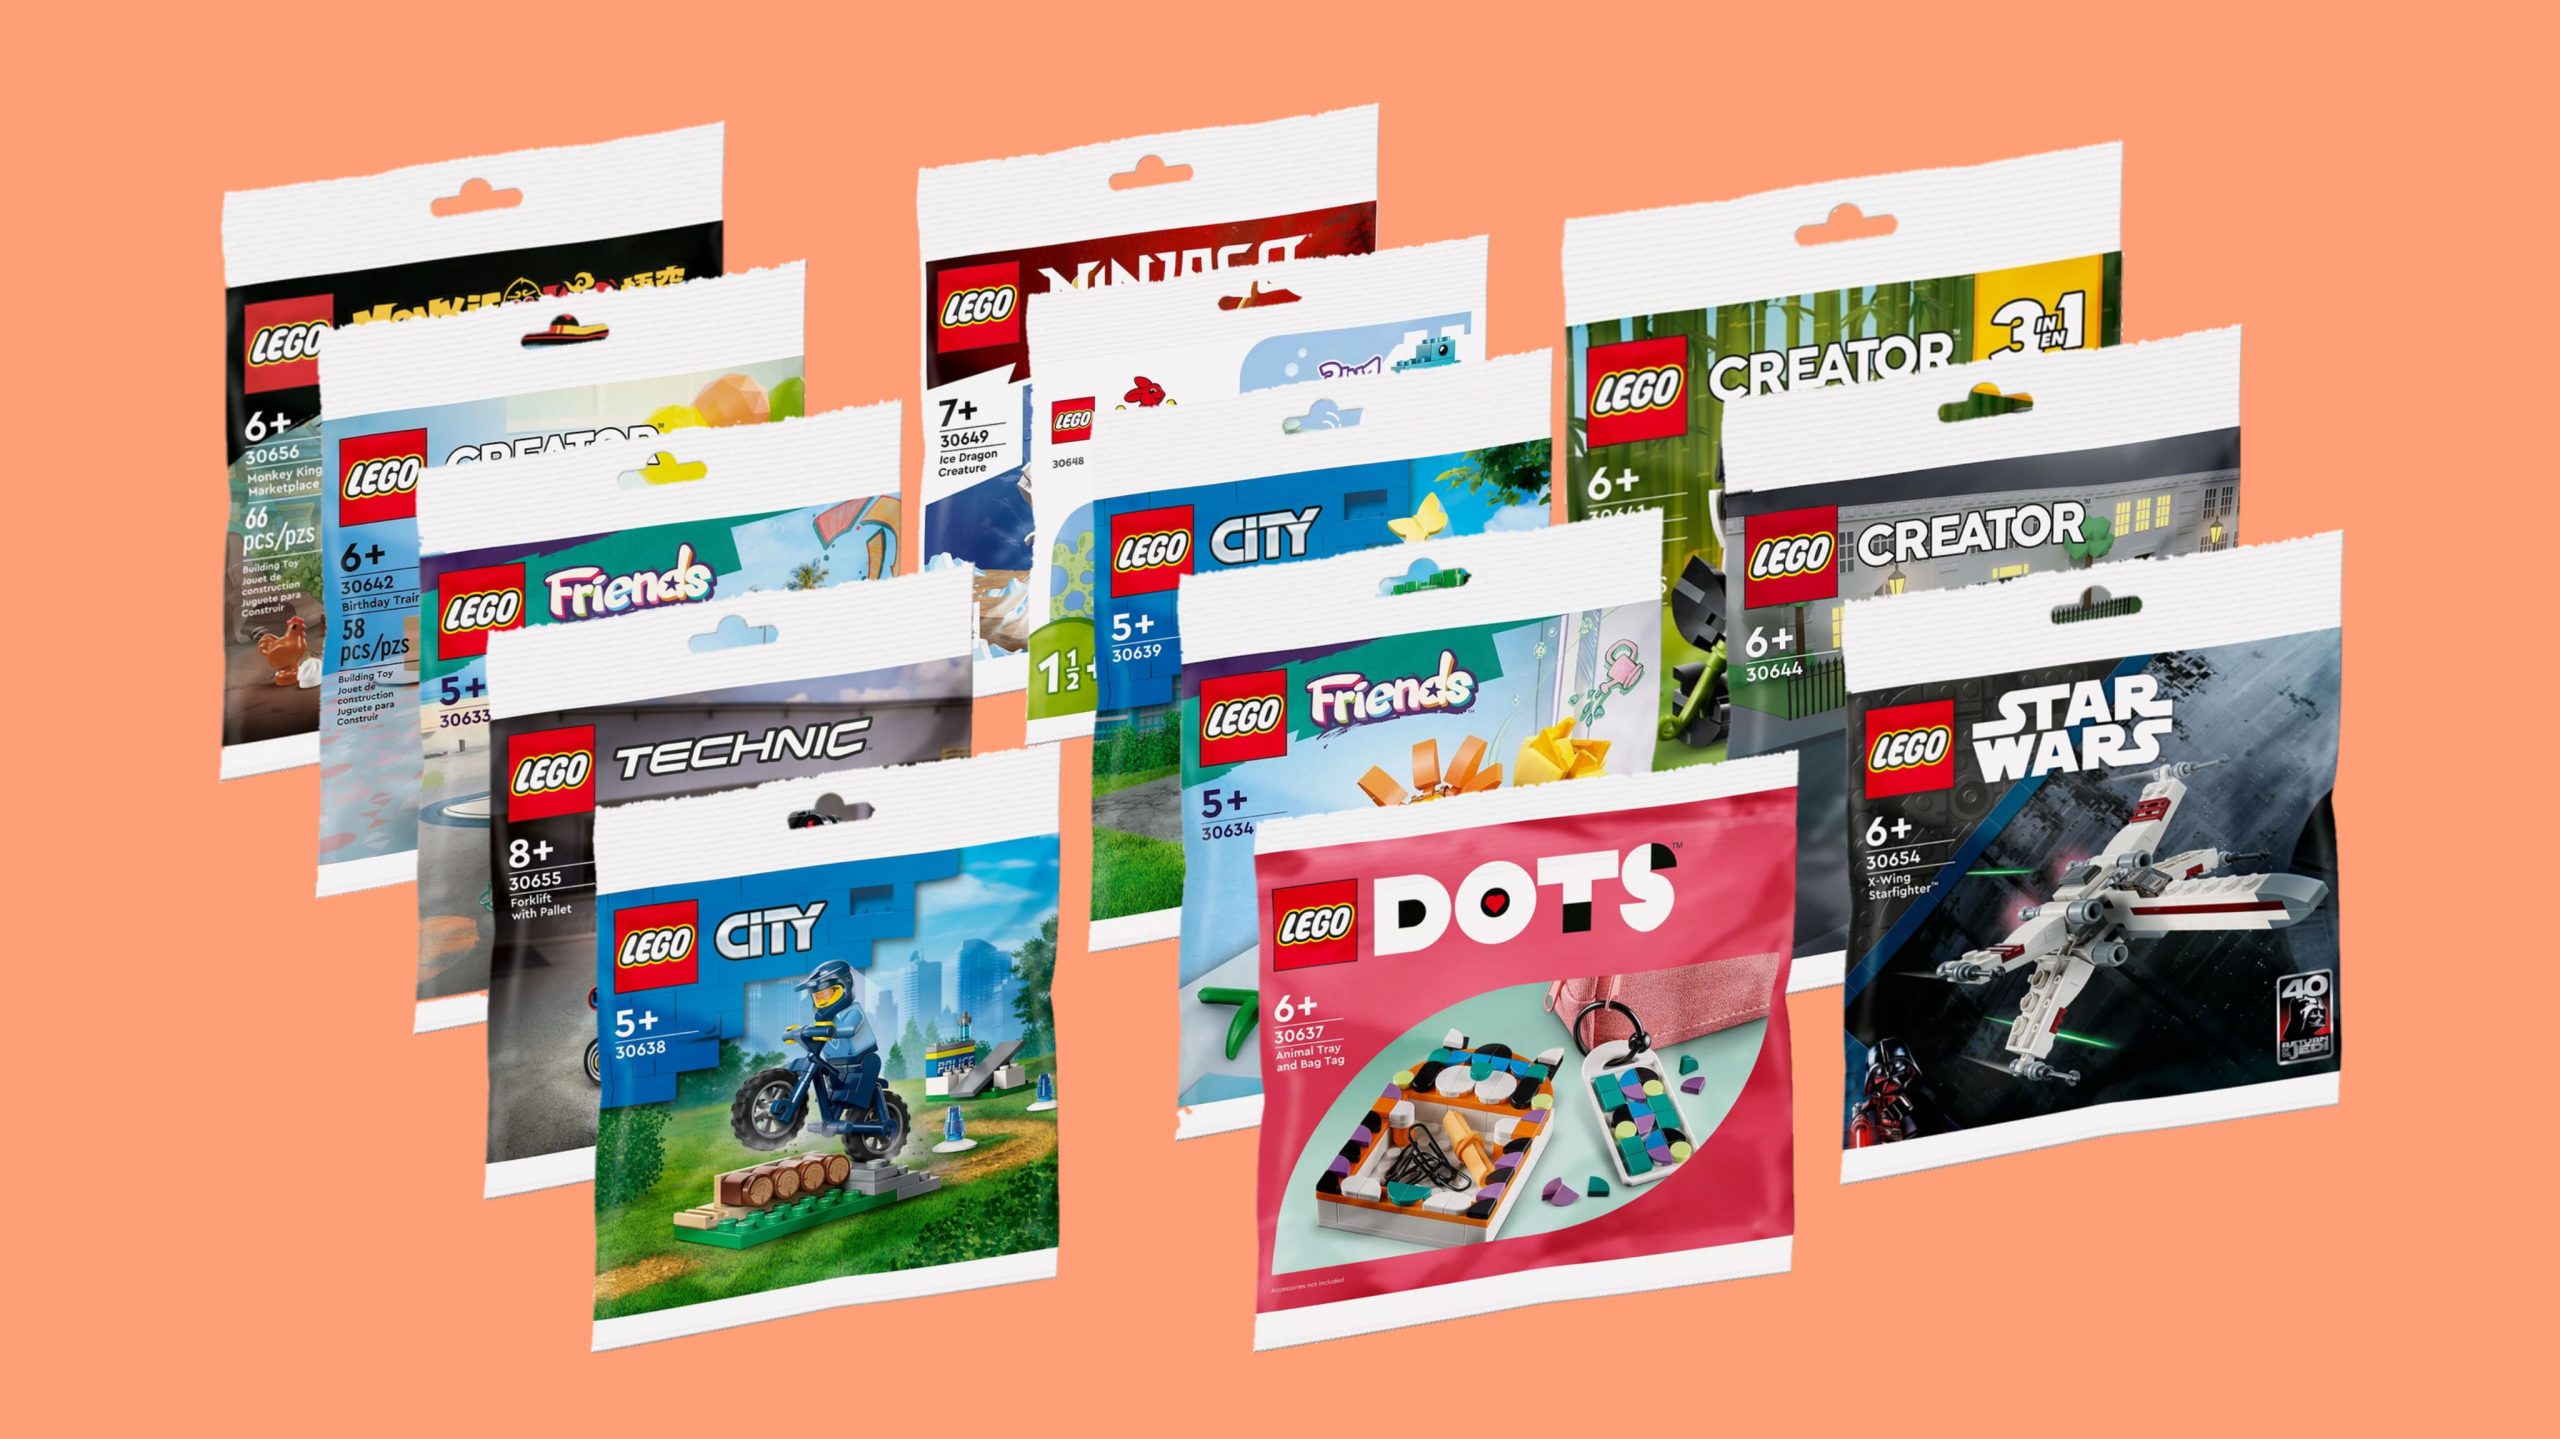 Collecting LEGO polybags in Asia  beyond